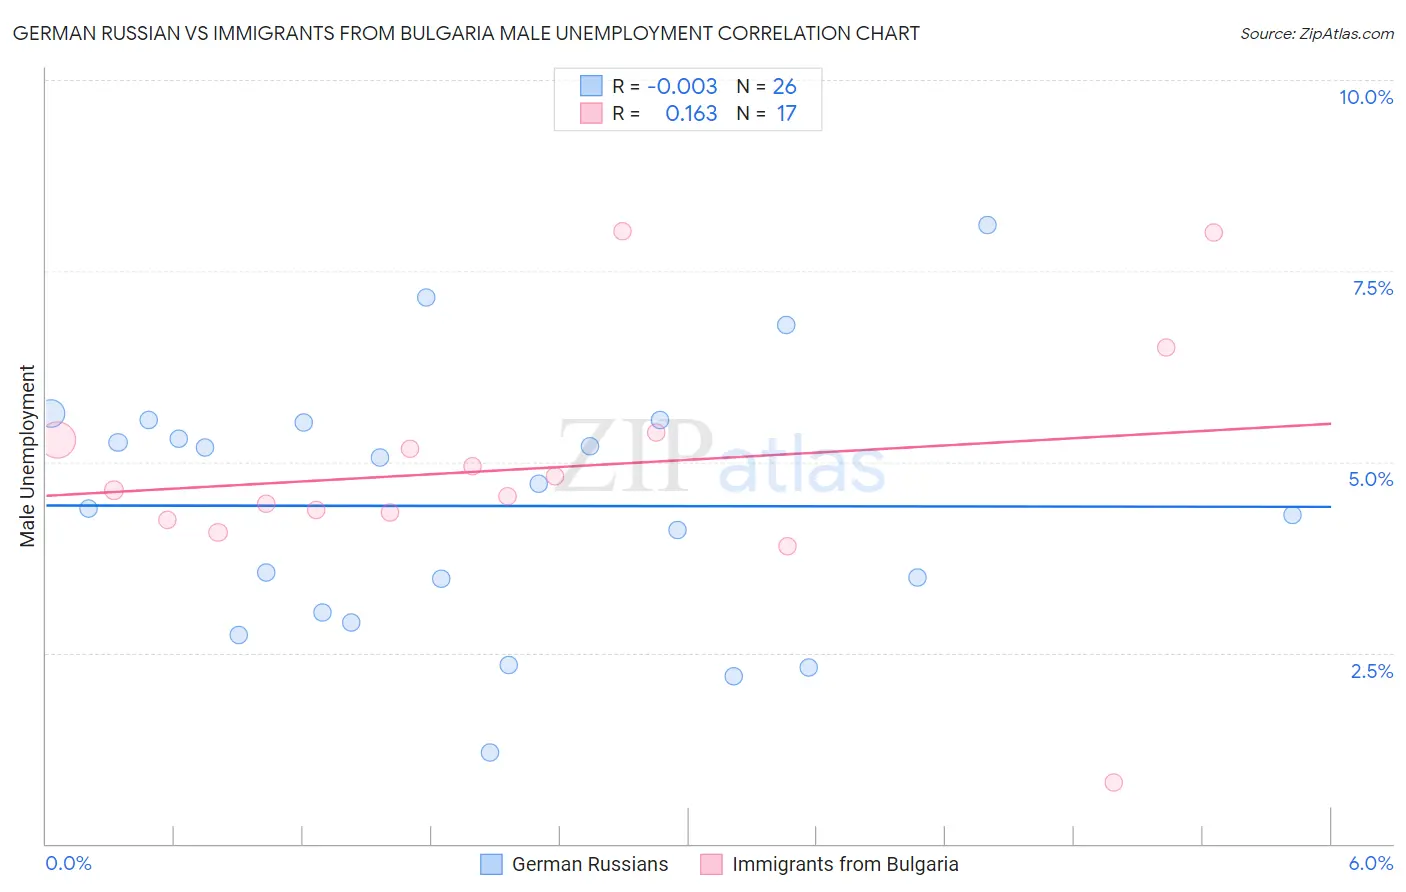 German Russian vs Immigrants from Bulgaria Male Unemployment